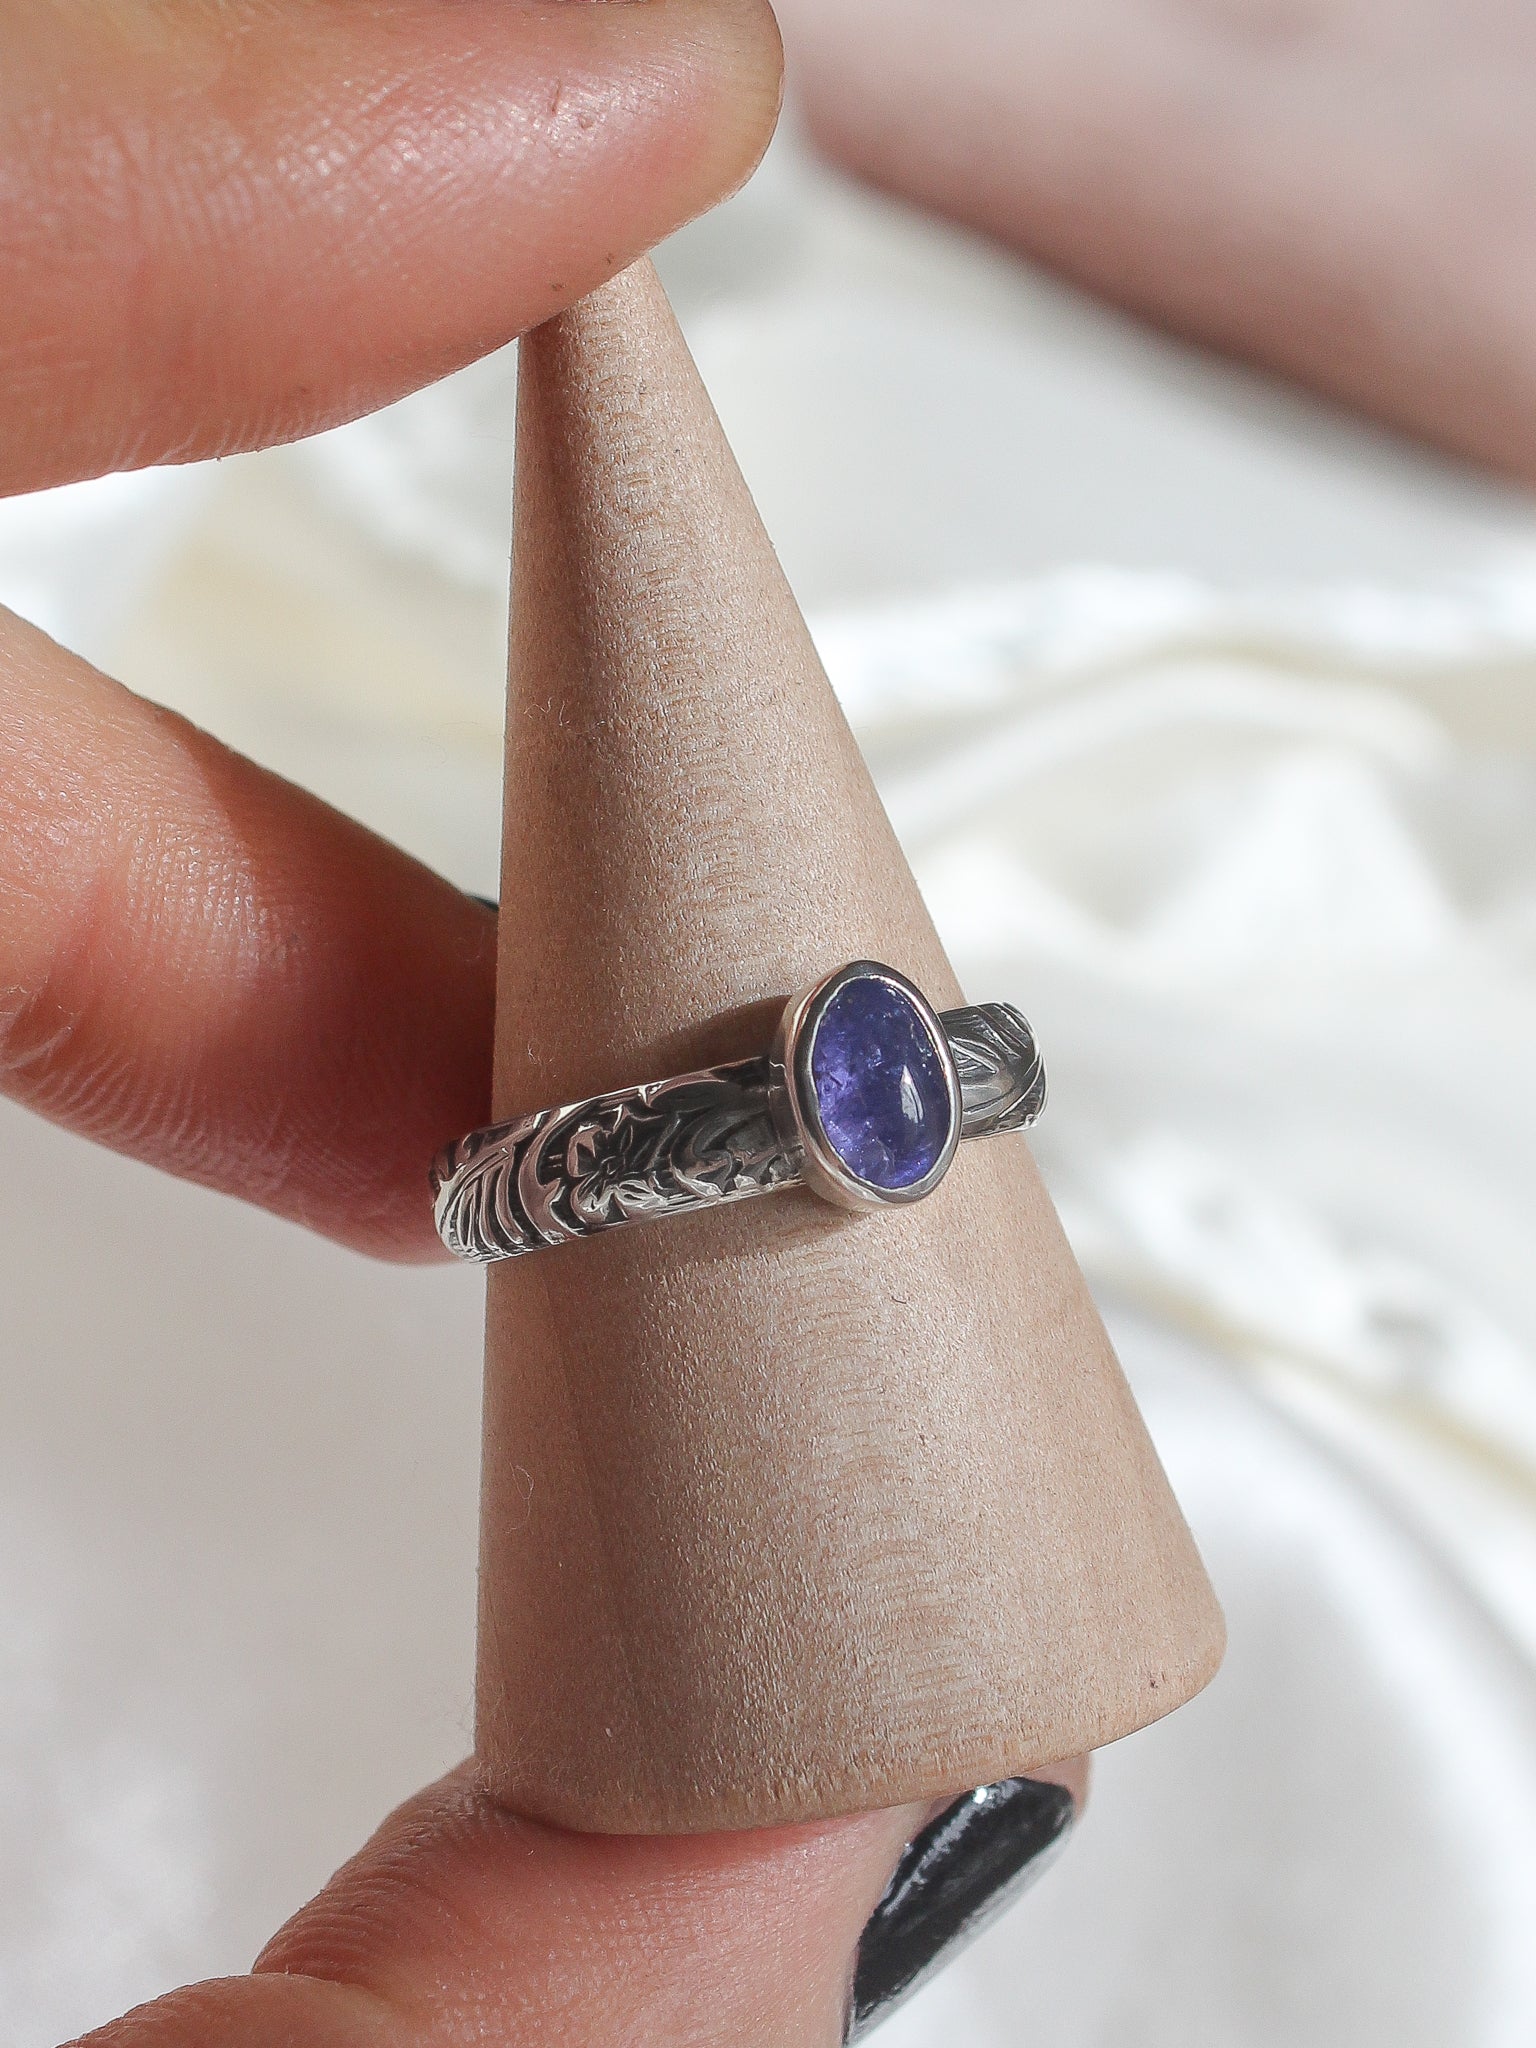 Handmade 925 sterling silver ring with tanzanite stone size 7.25